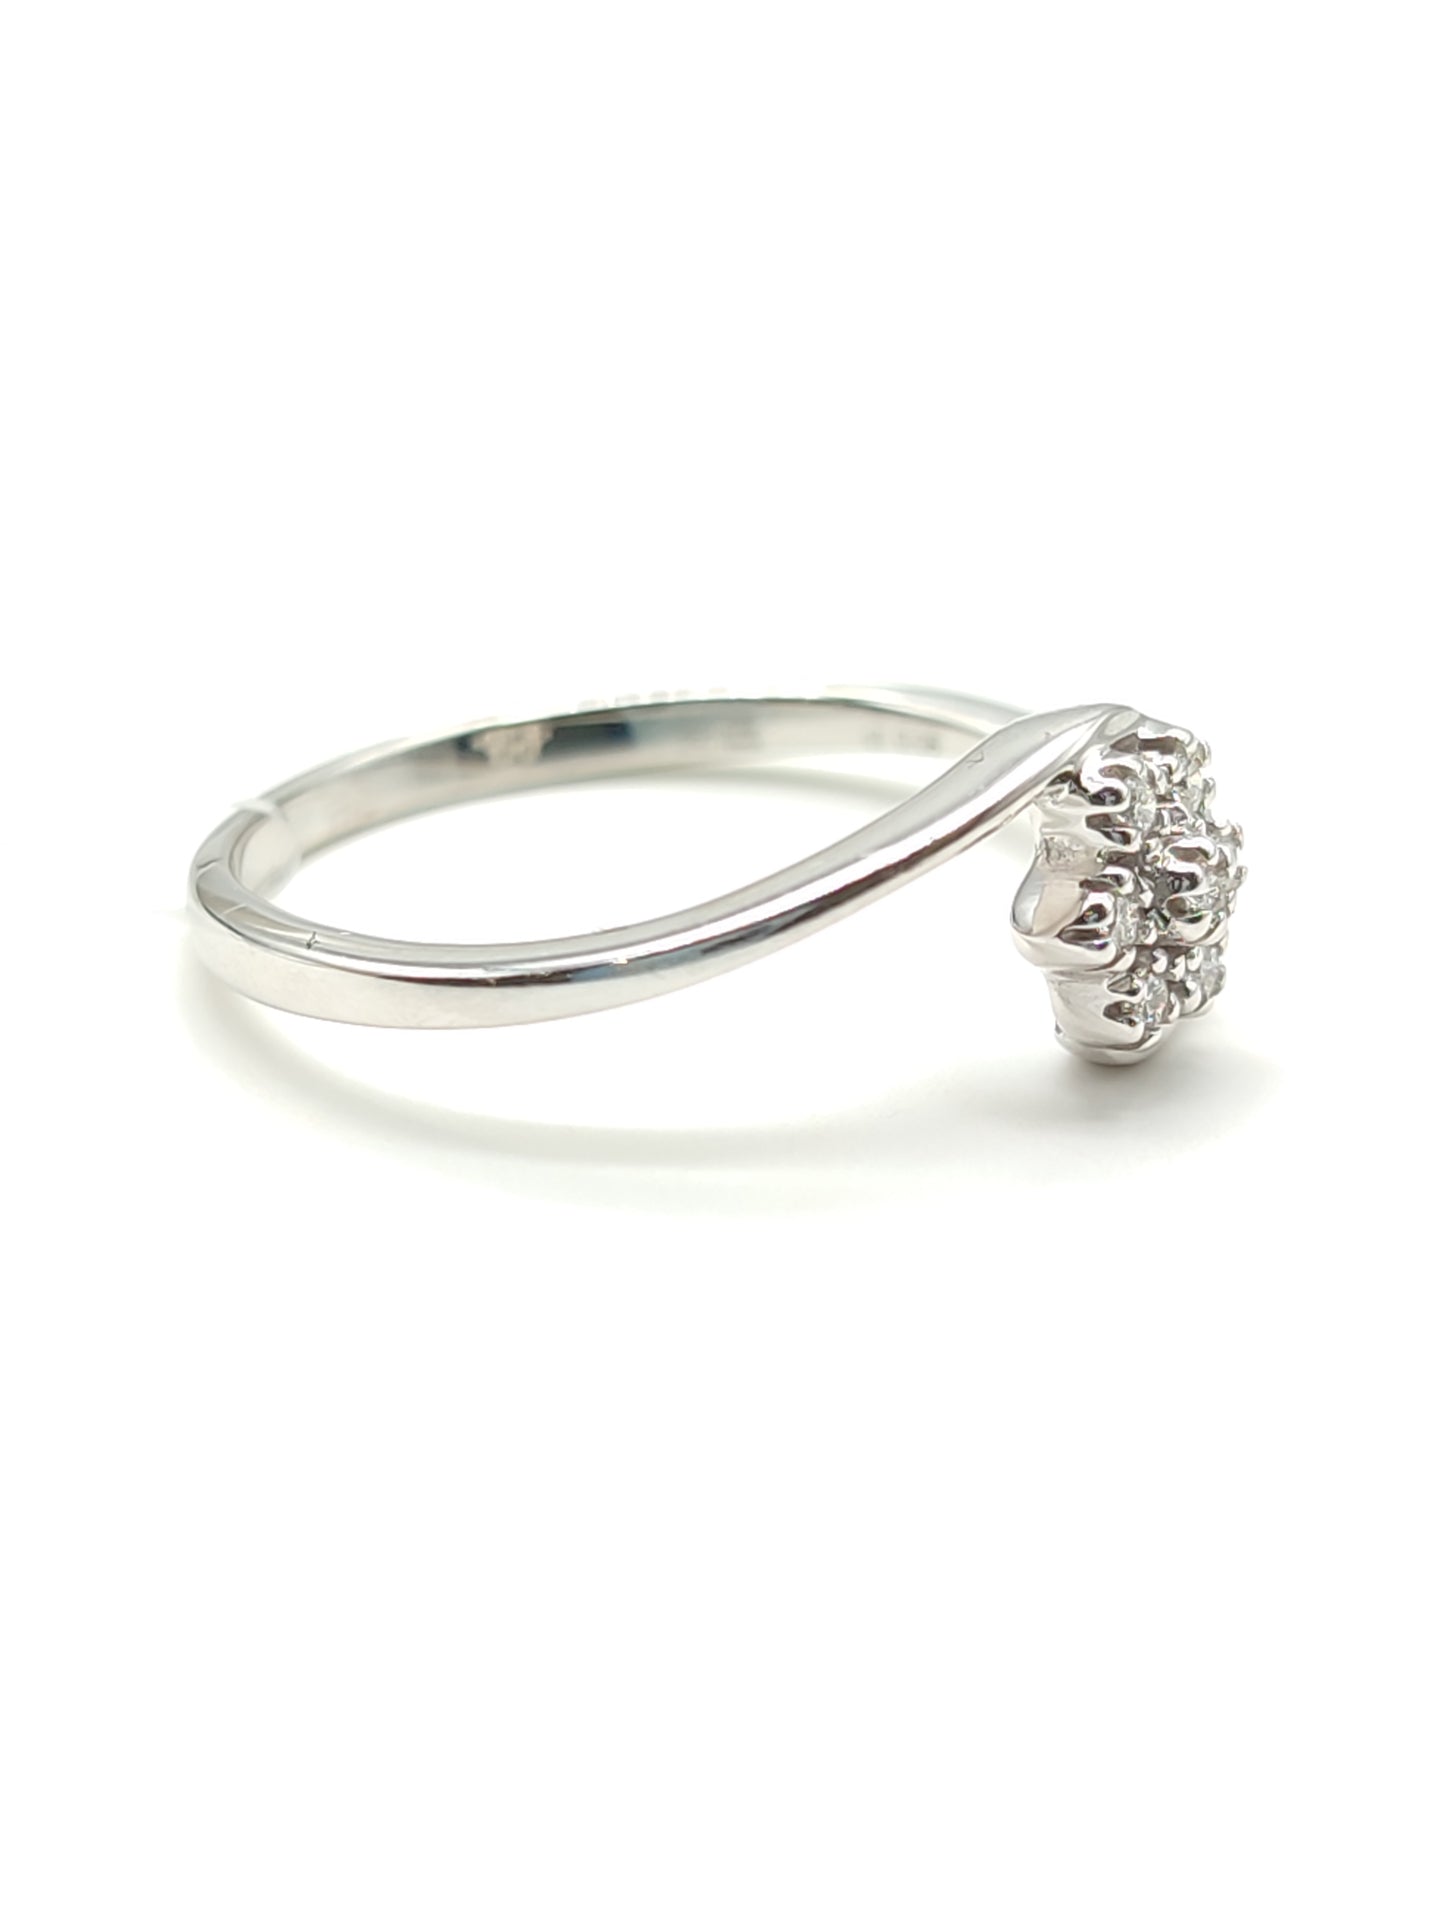 Solitaire flower ring 0.06ct